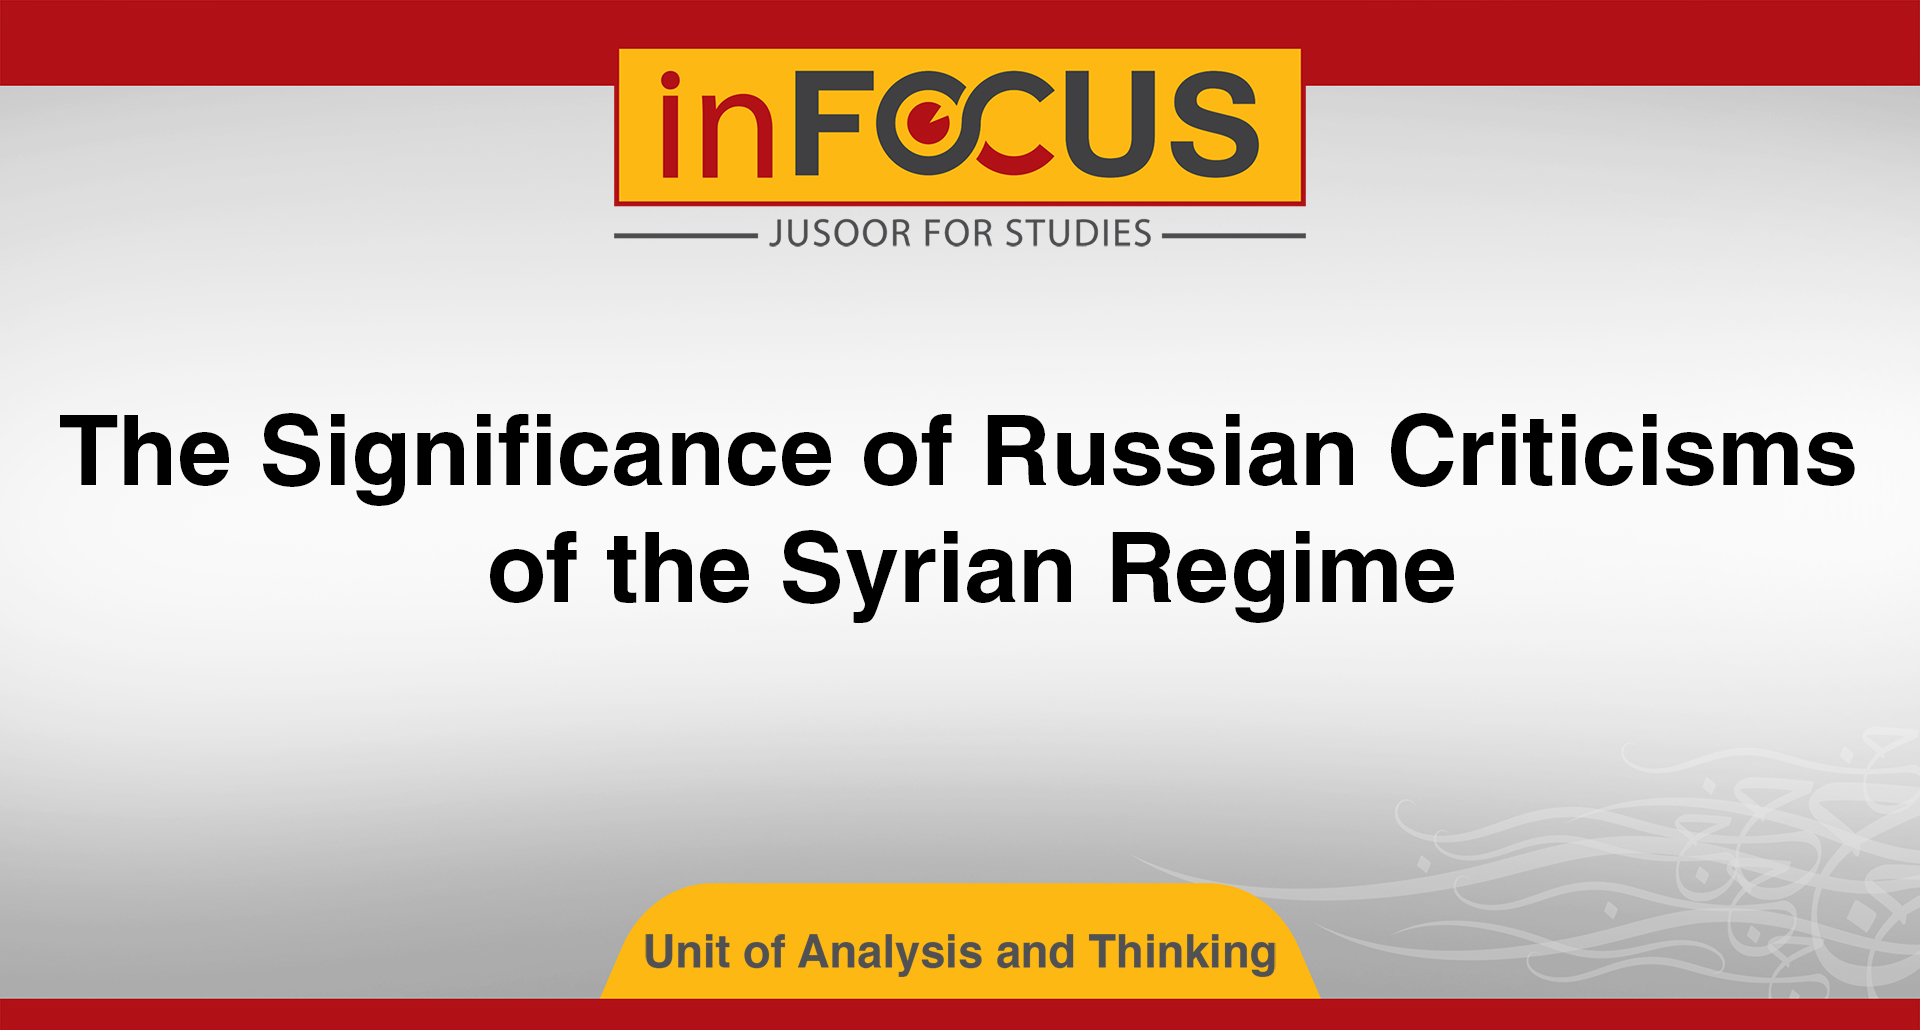 The Significance of Russian Criticisms of the Syrian Regime